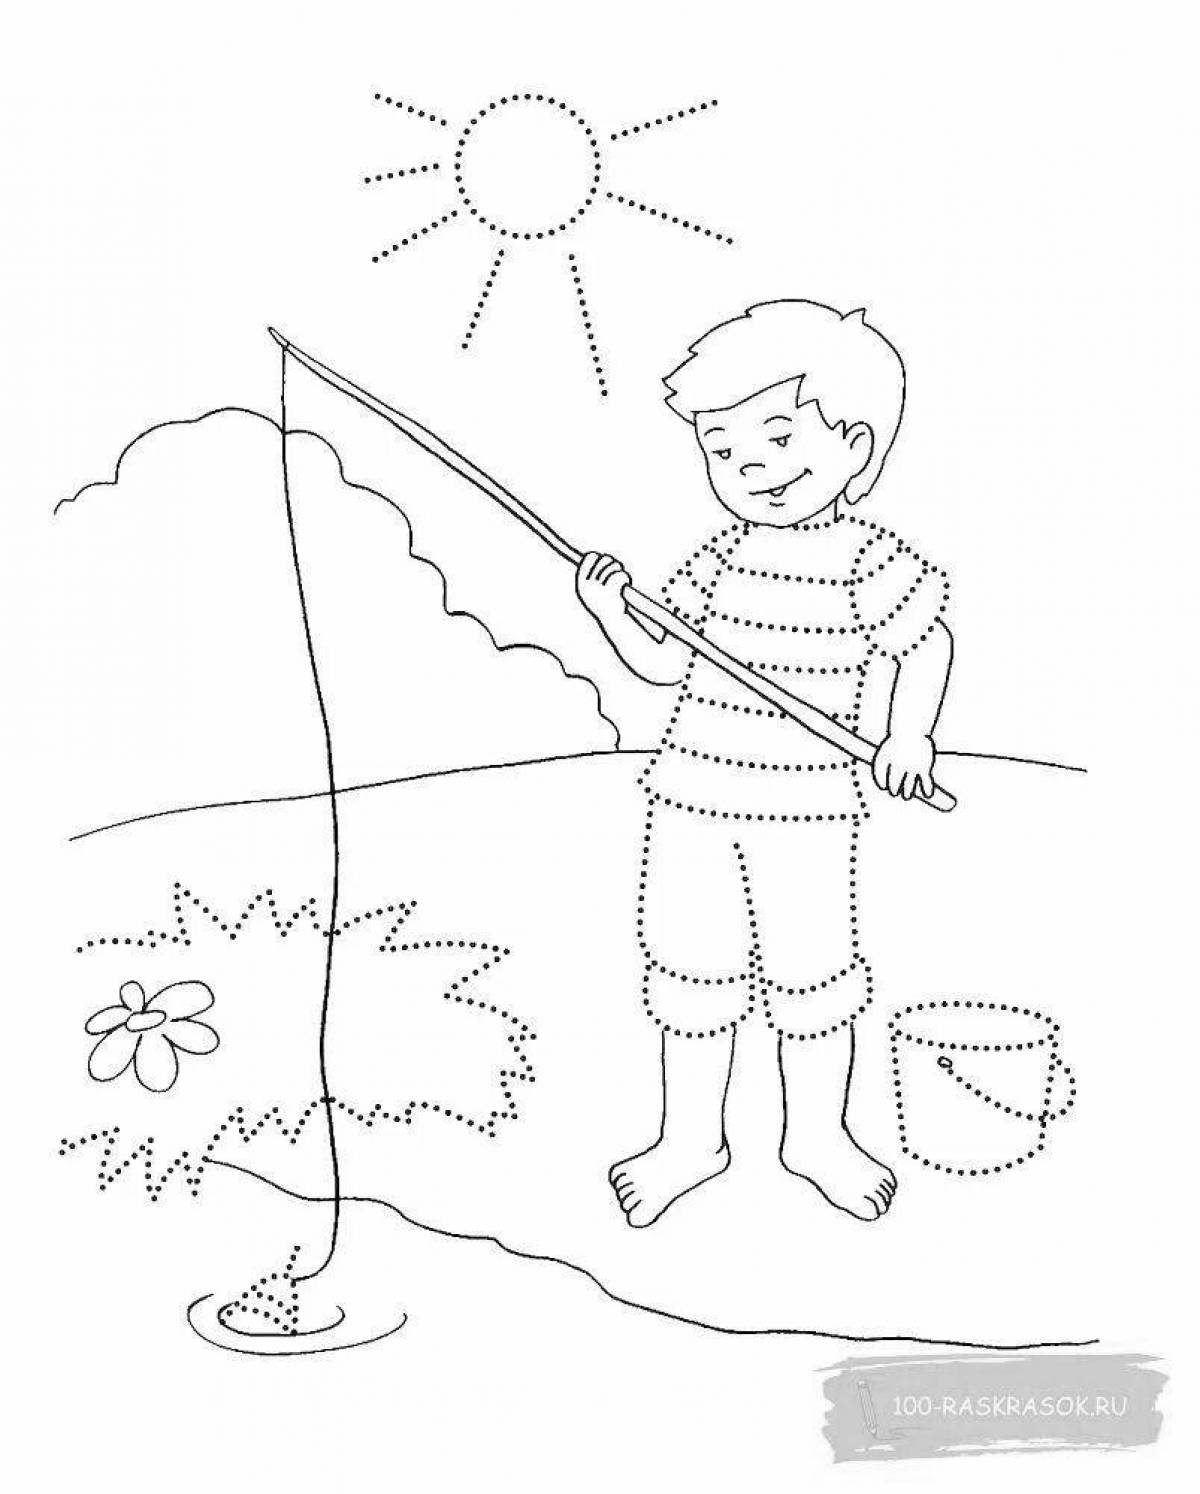 Adorable fishing coloring book for kids